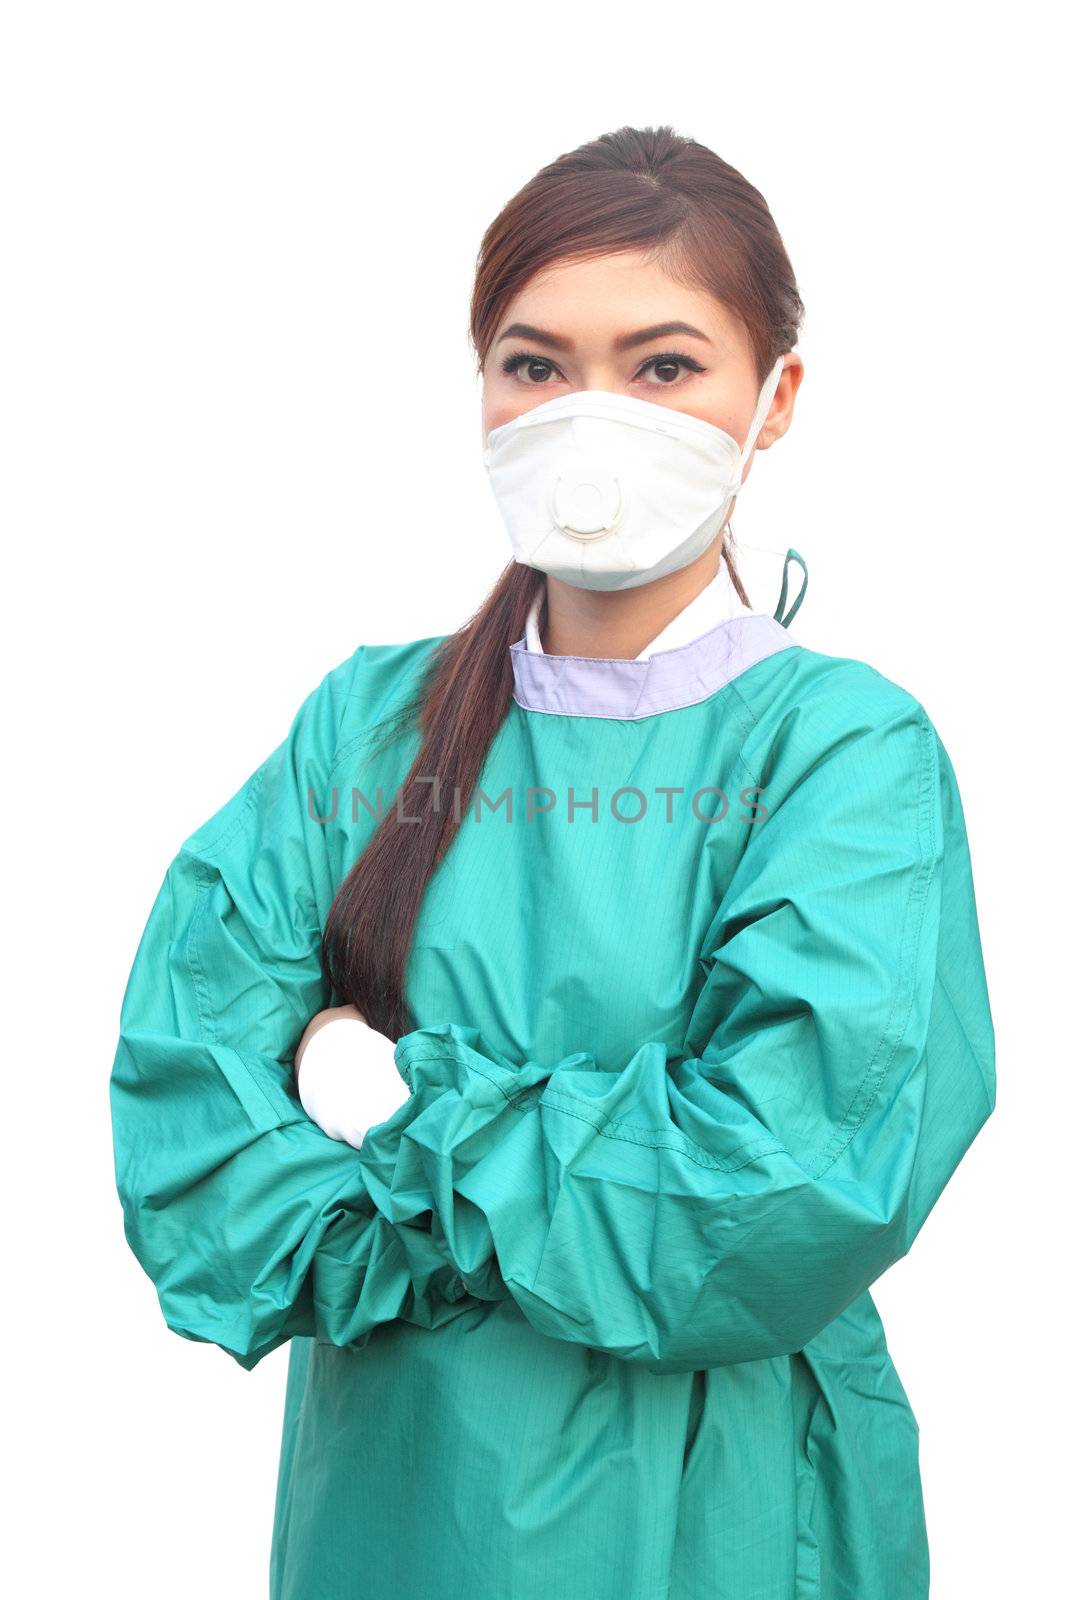 female doctor wearing a green scrubs with mask